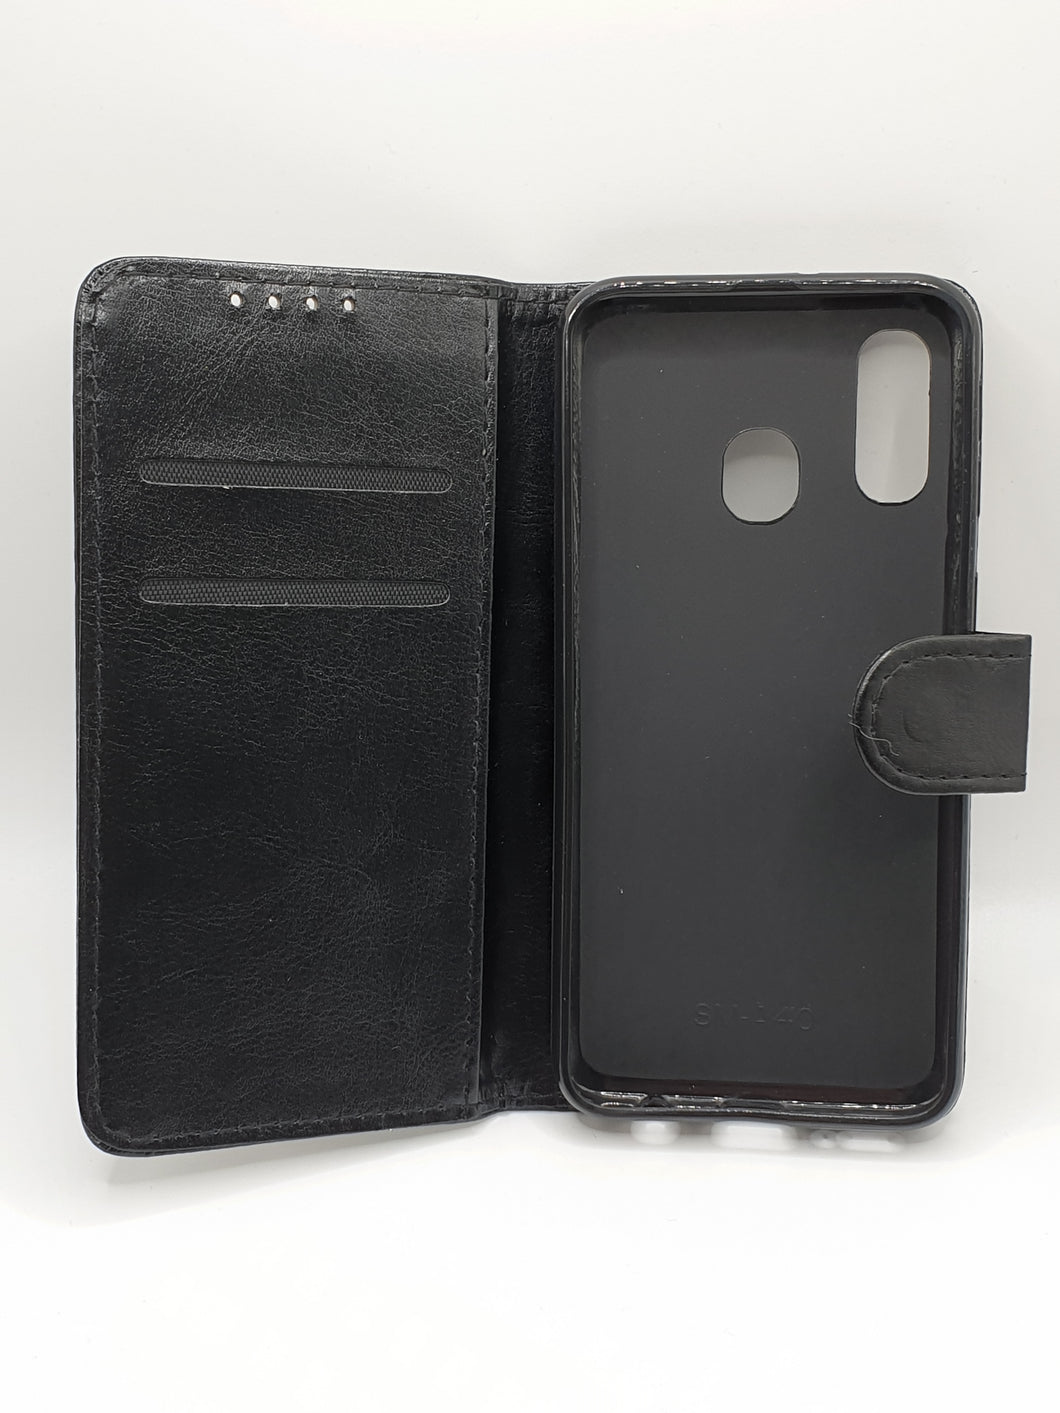 Samsung A40 Wallet Card Insert Case Faux Leather Black Full Protection